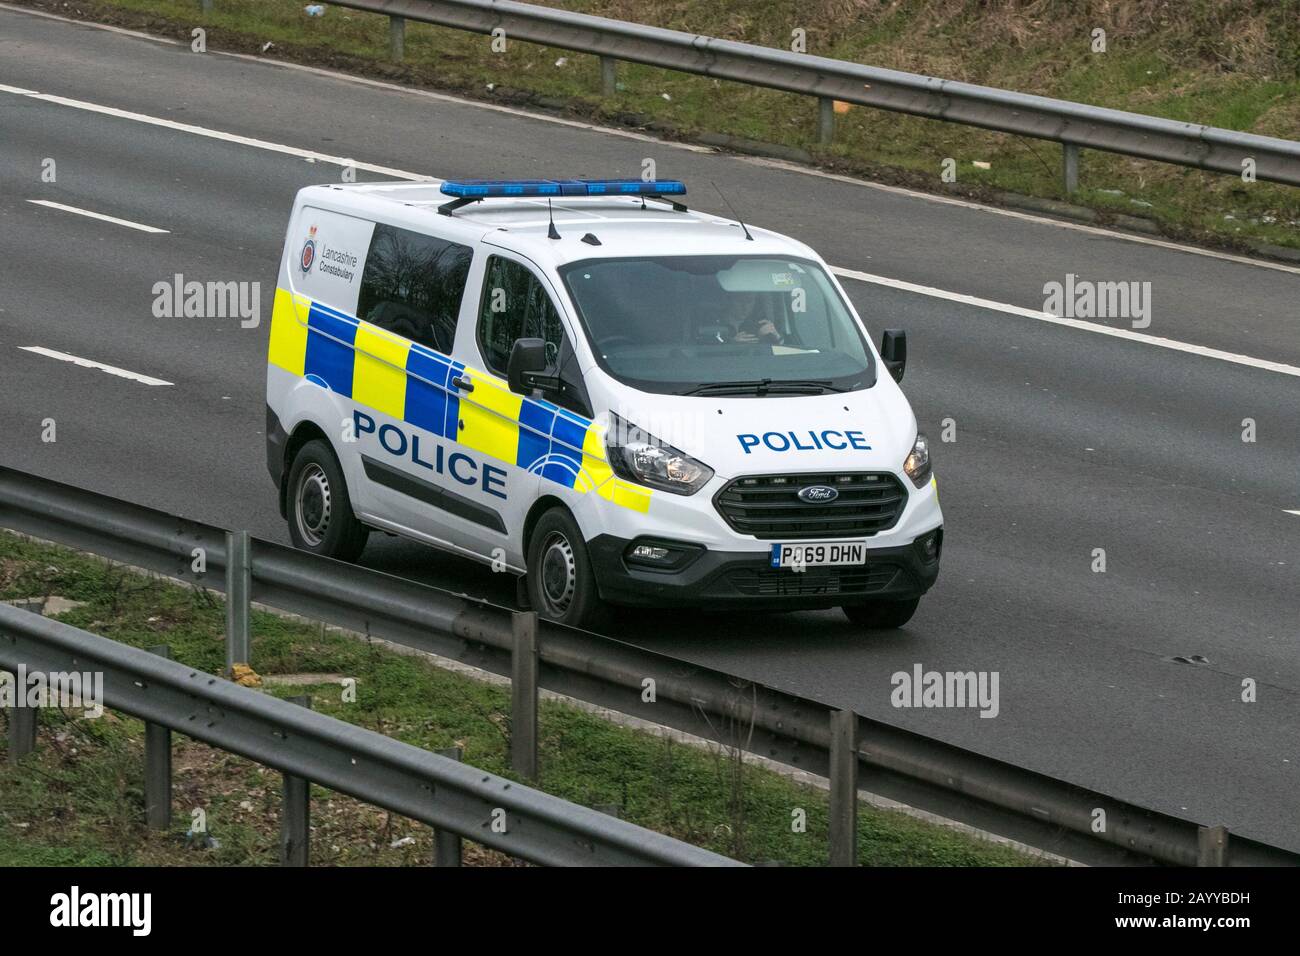 police force officer service policeman pc wpc cop copper law enforcement emergency services policewoman law legal patrol patrolling crime criminal Stock Photo